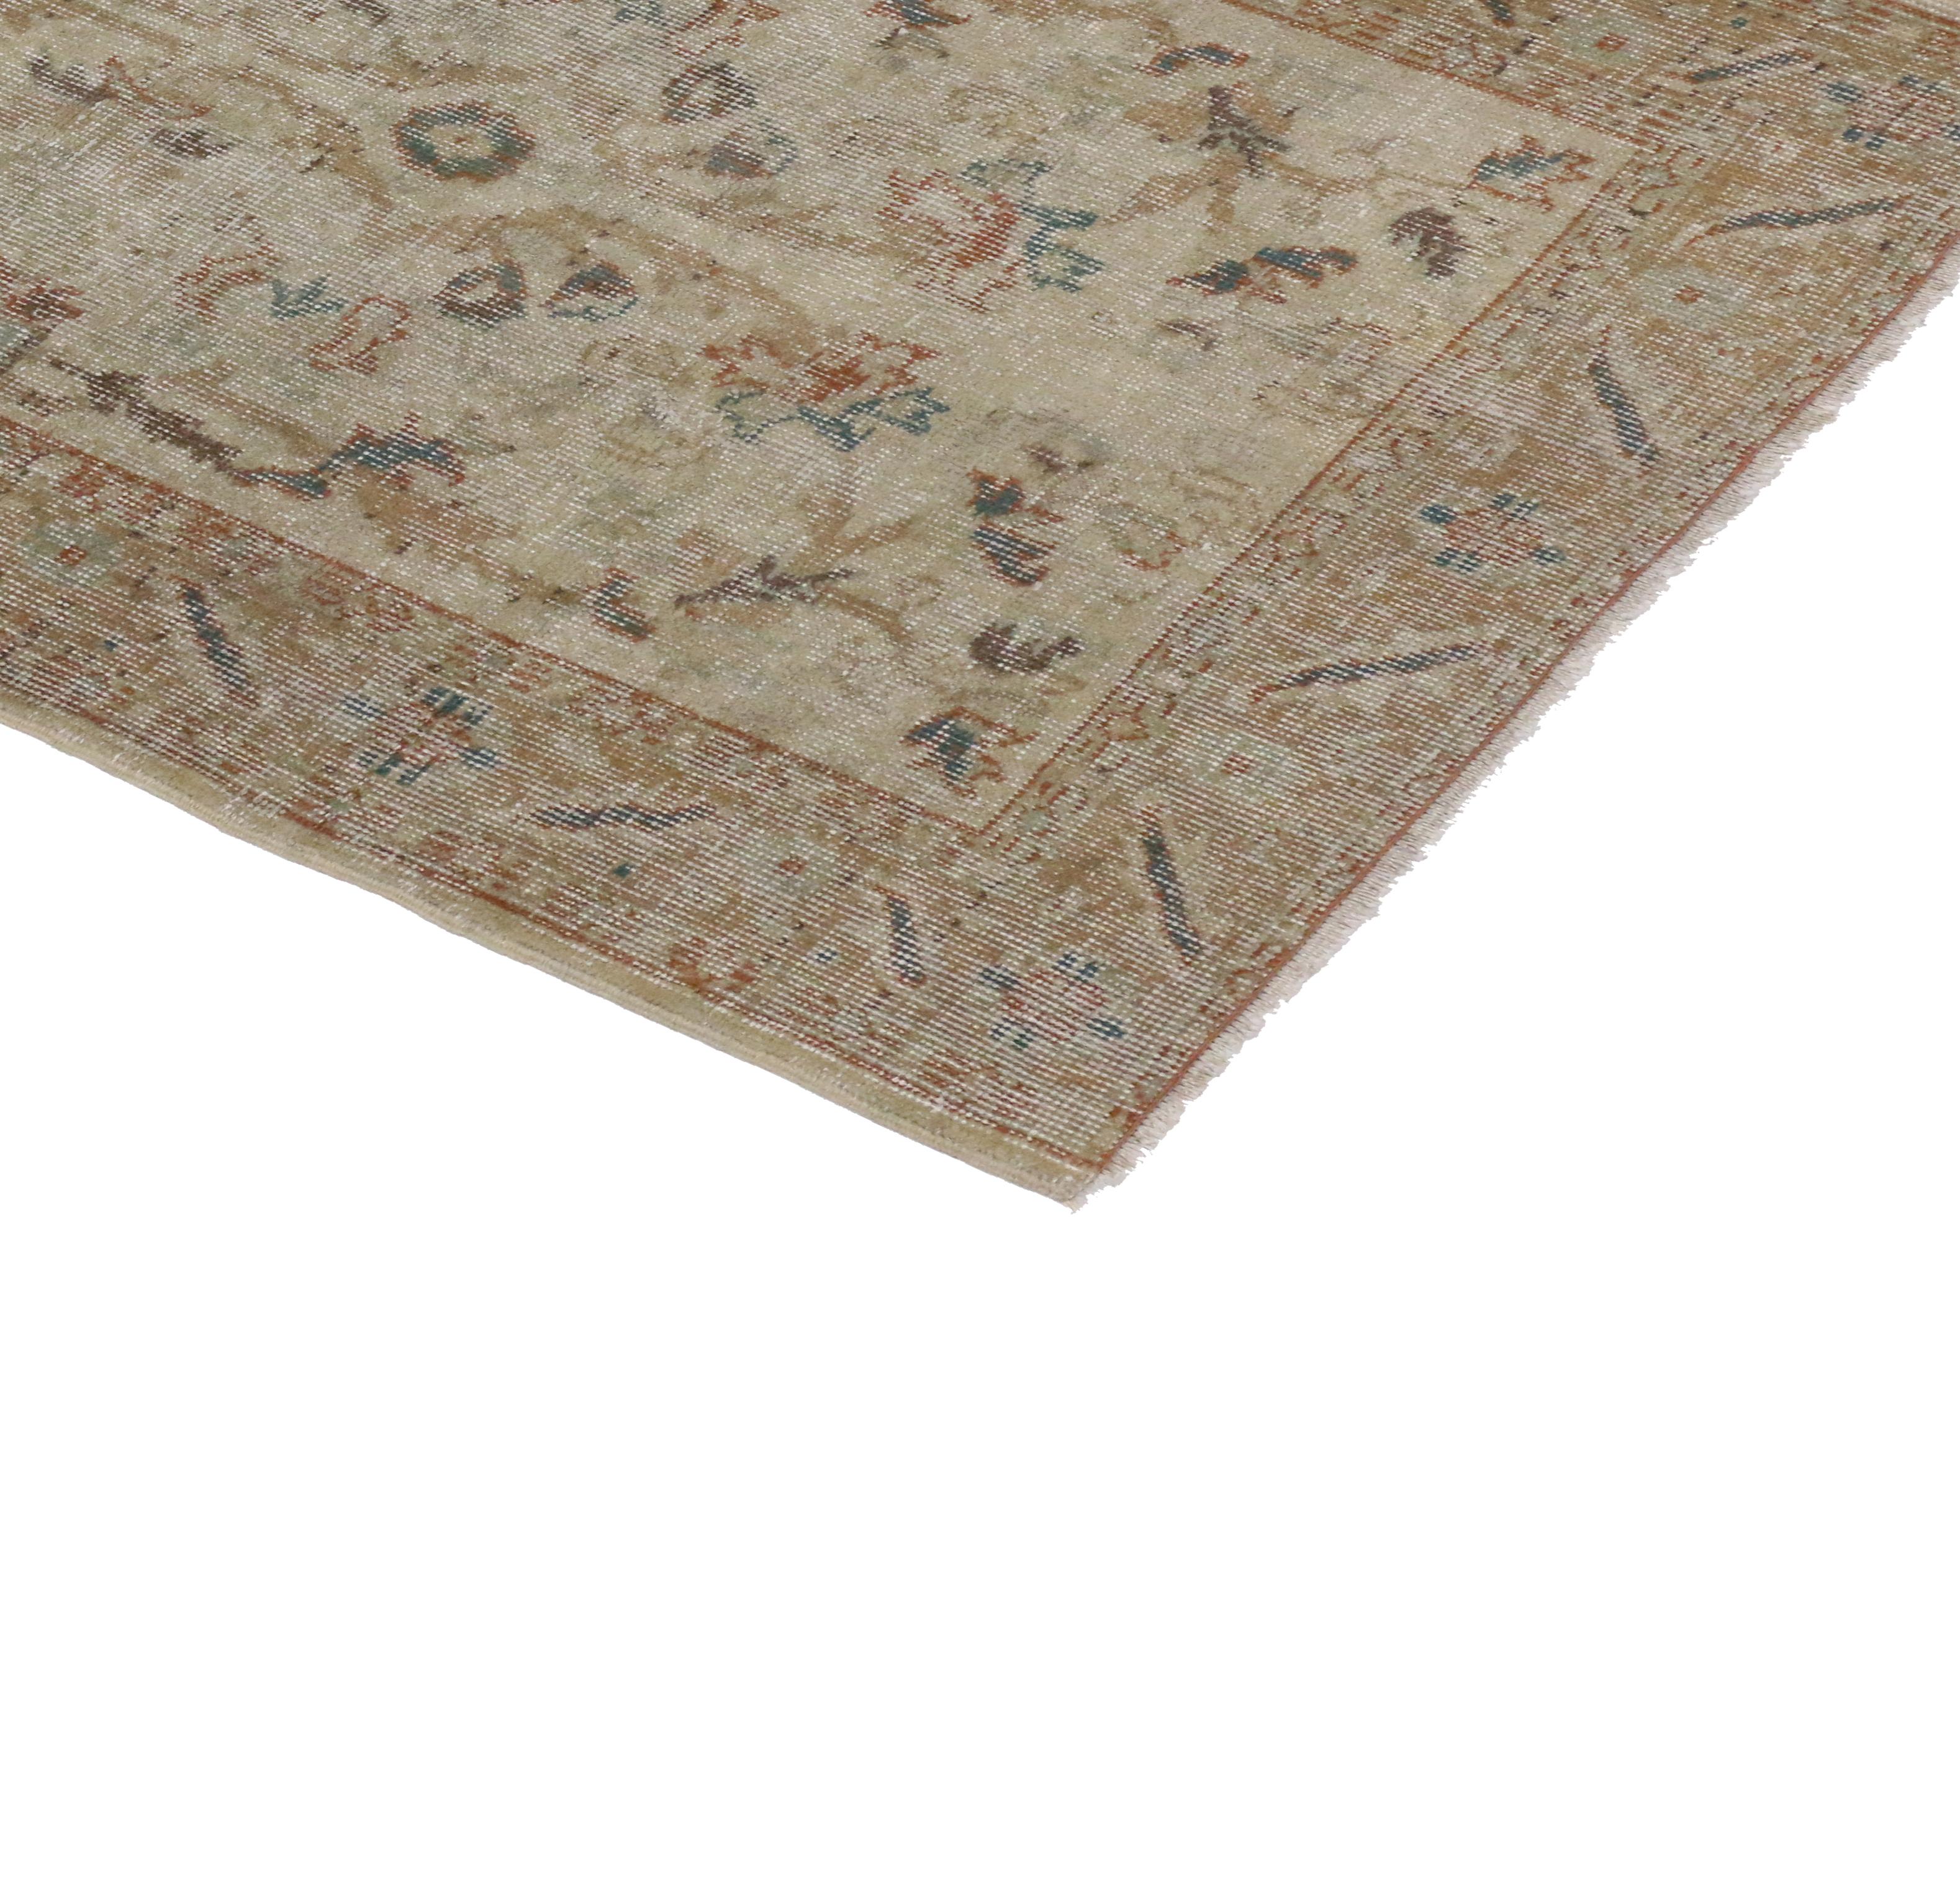 51265, distressed vintage Turkish Sivas rug with rustic farmhouse style. This distressed vintage Turkish Sivas rug with rustic farmhouse style features an unpretentious botanical design composed of leaves, vines, and palmettes. From the distressed